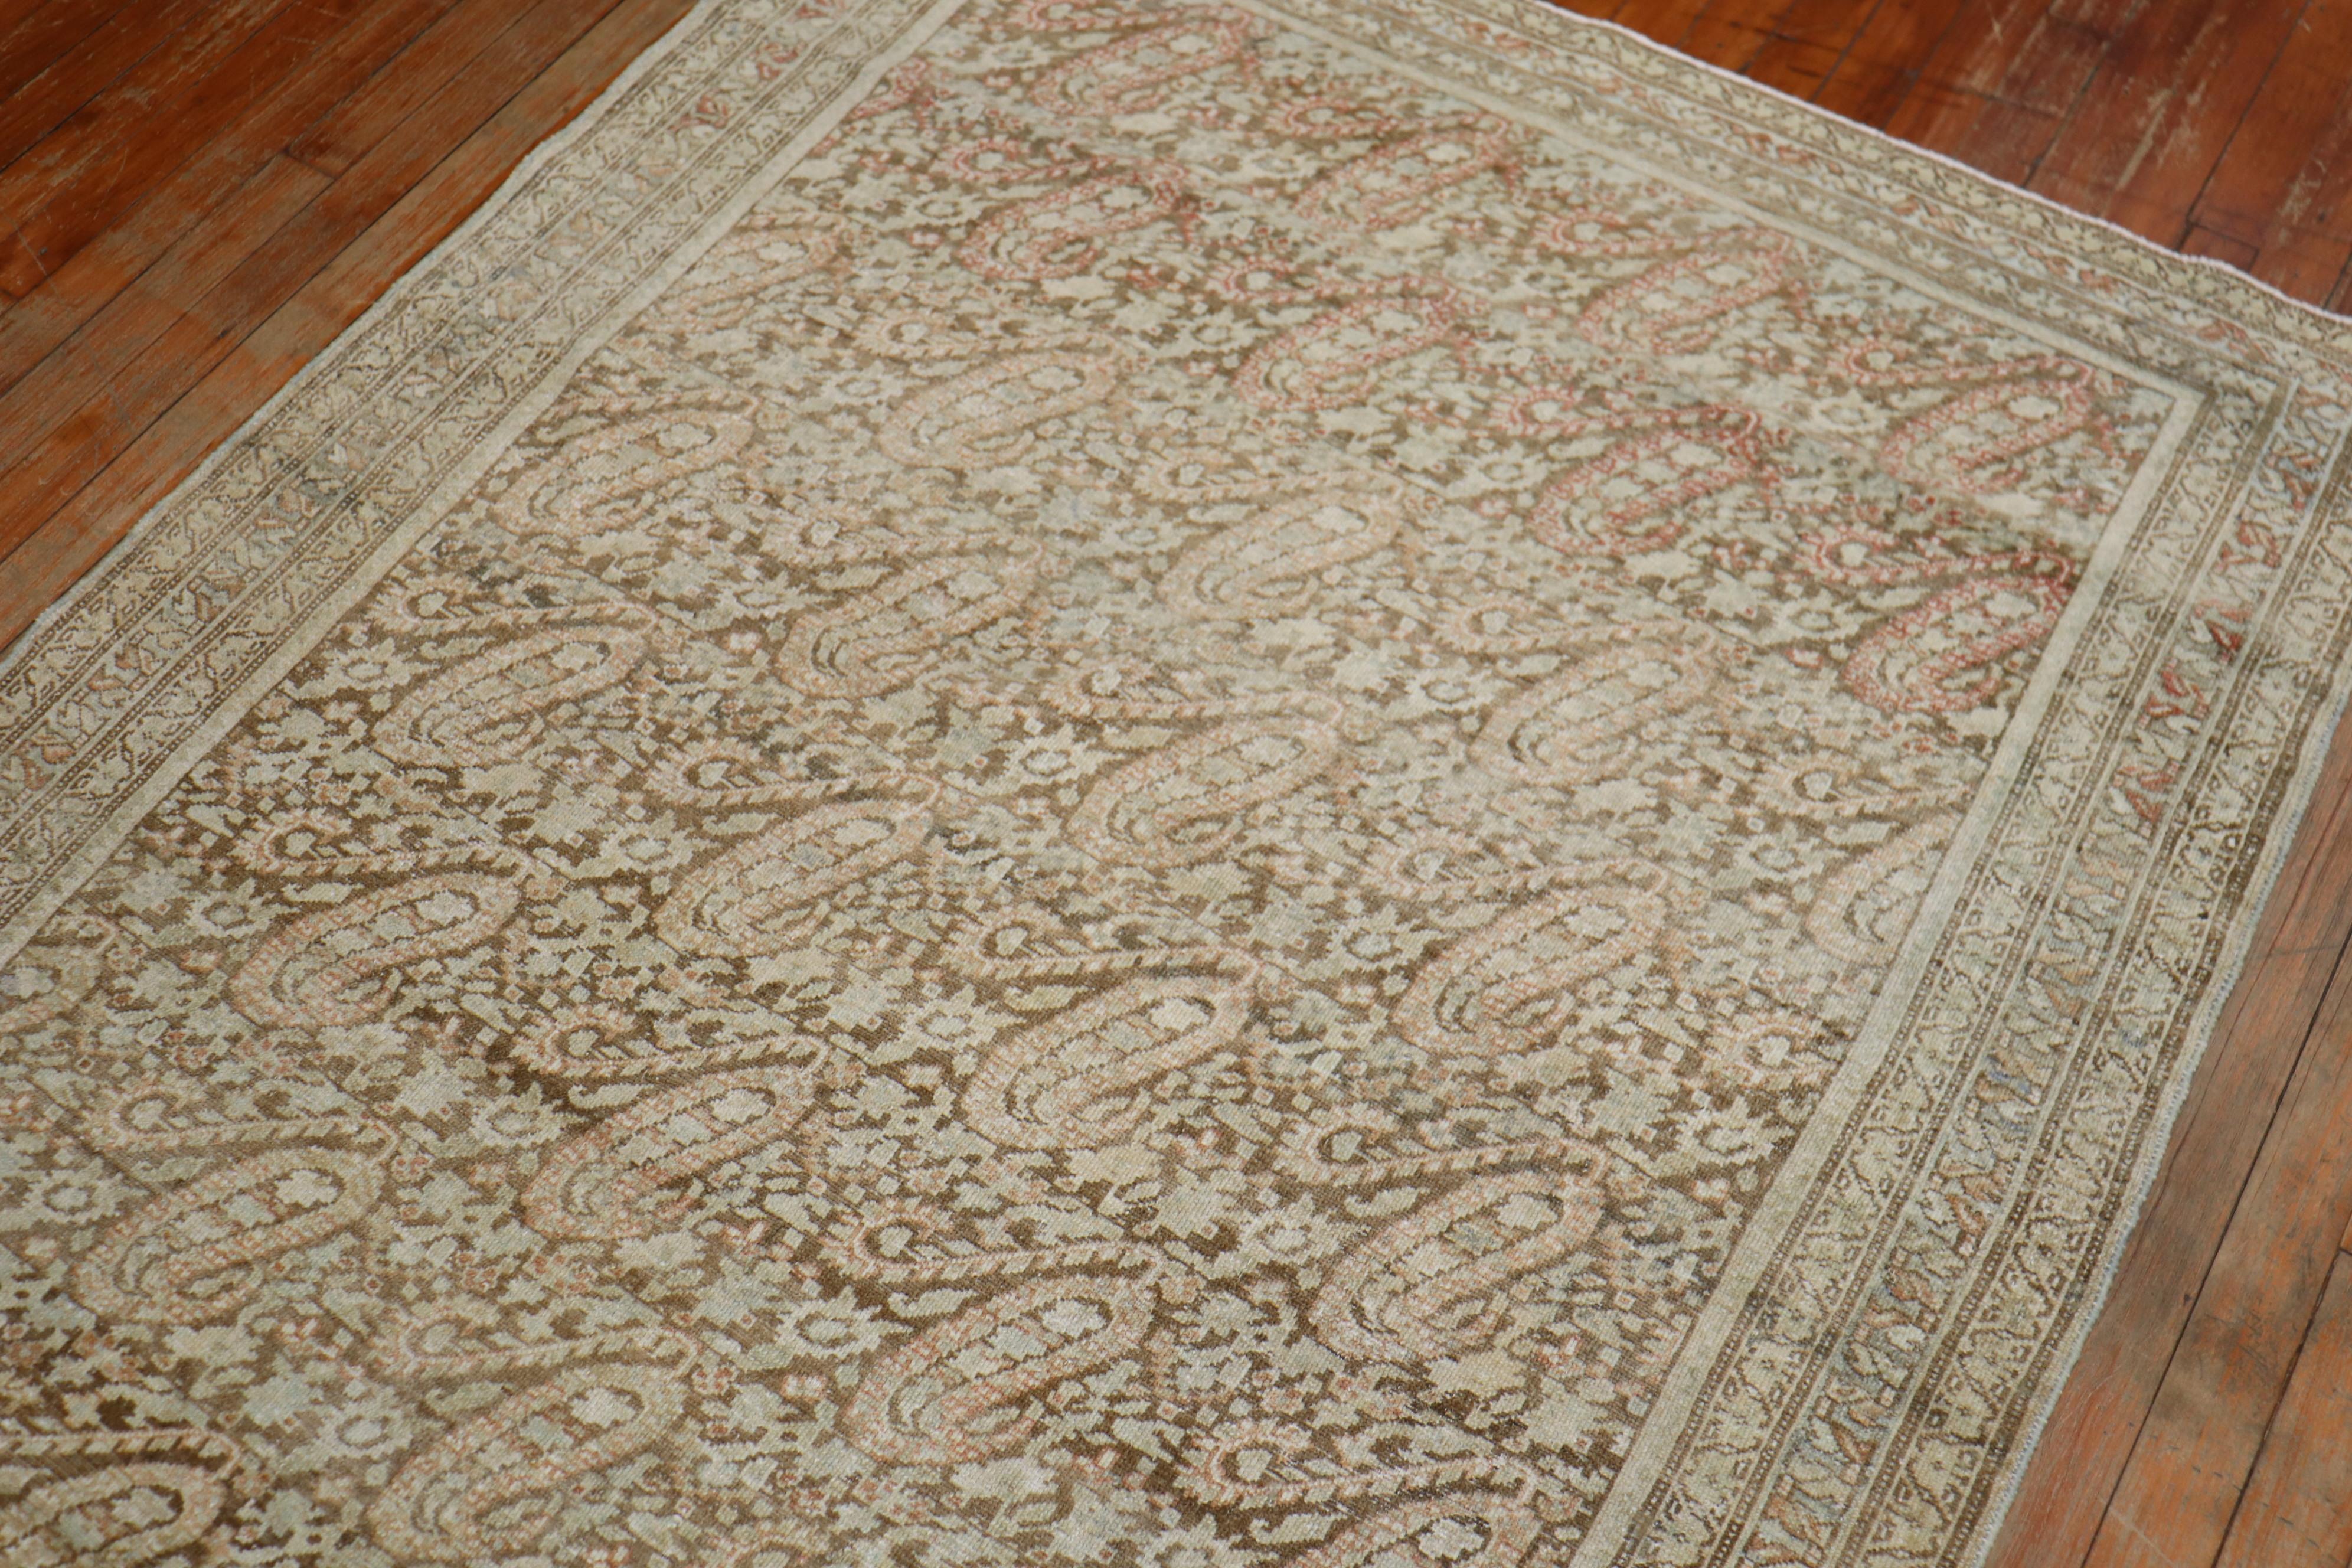 Authentic handmade Persian Malayer rug featuring a spiraling boteh paisley design in soft earth tones

Measures: 4'5' x 6'4''.